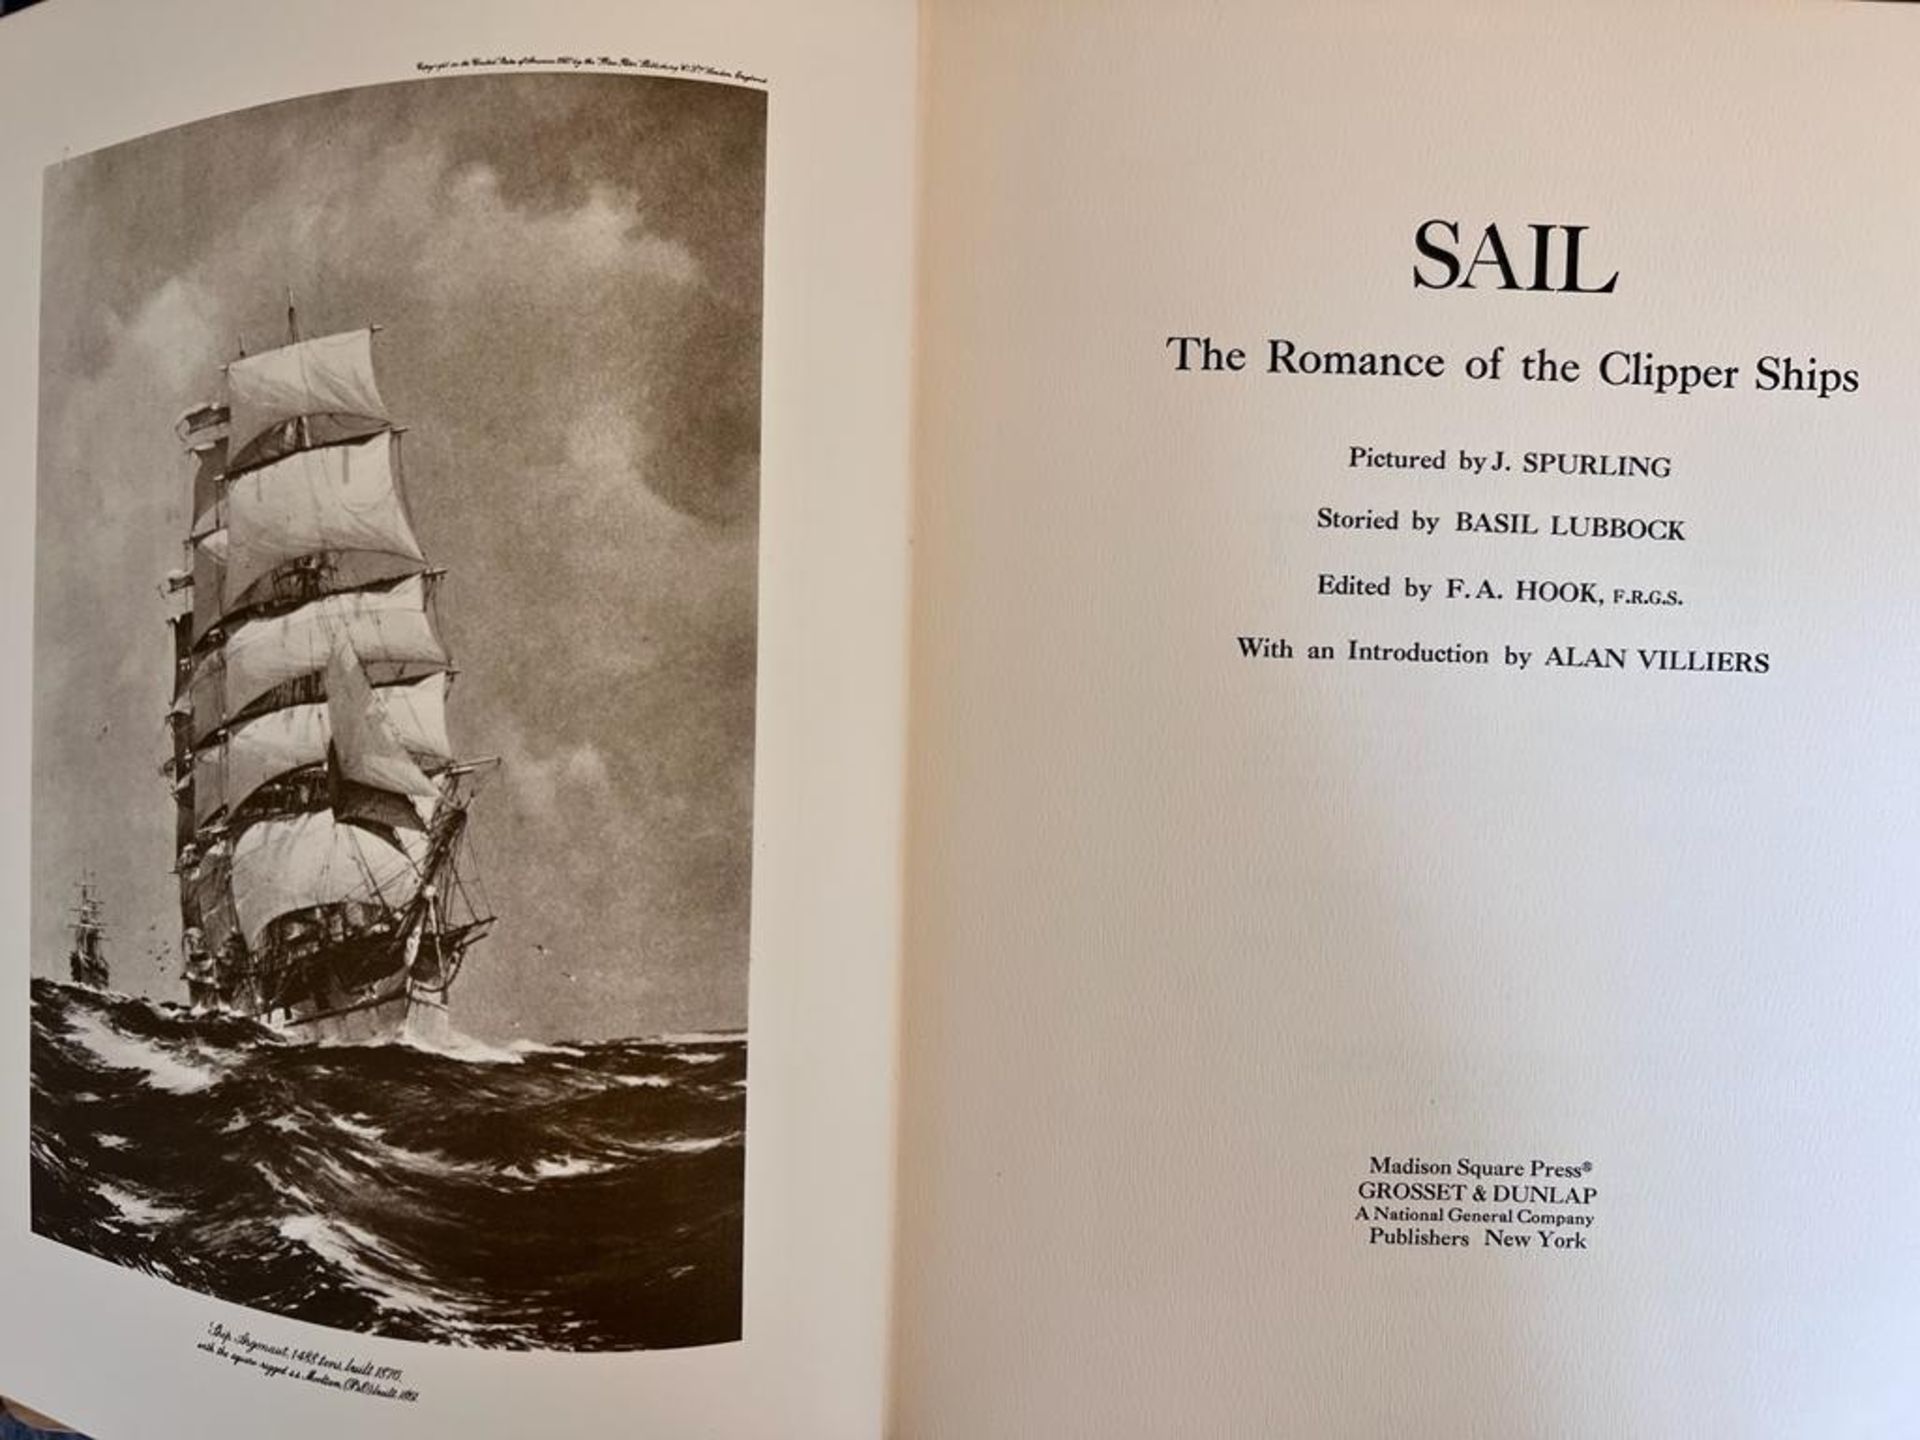 J SPURLING, 'SAIL' STORIED BY BASIL LUBBOCK, CLOTH BOARDS, THREE VOLUMES - Image 4 of 7